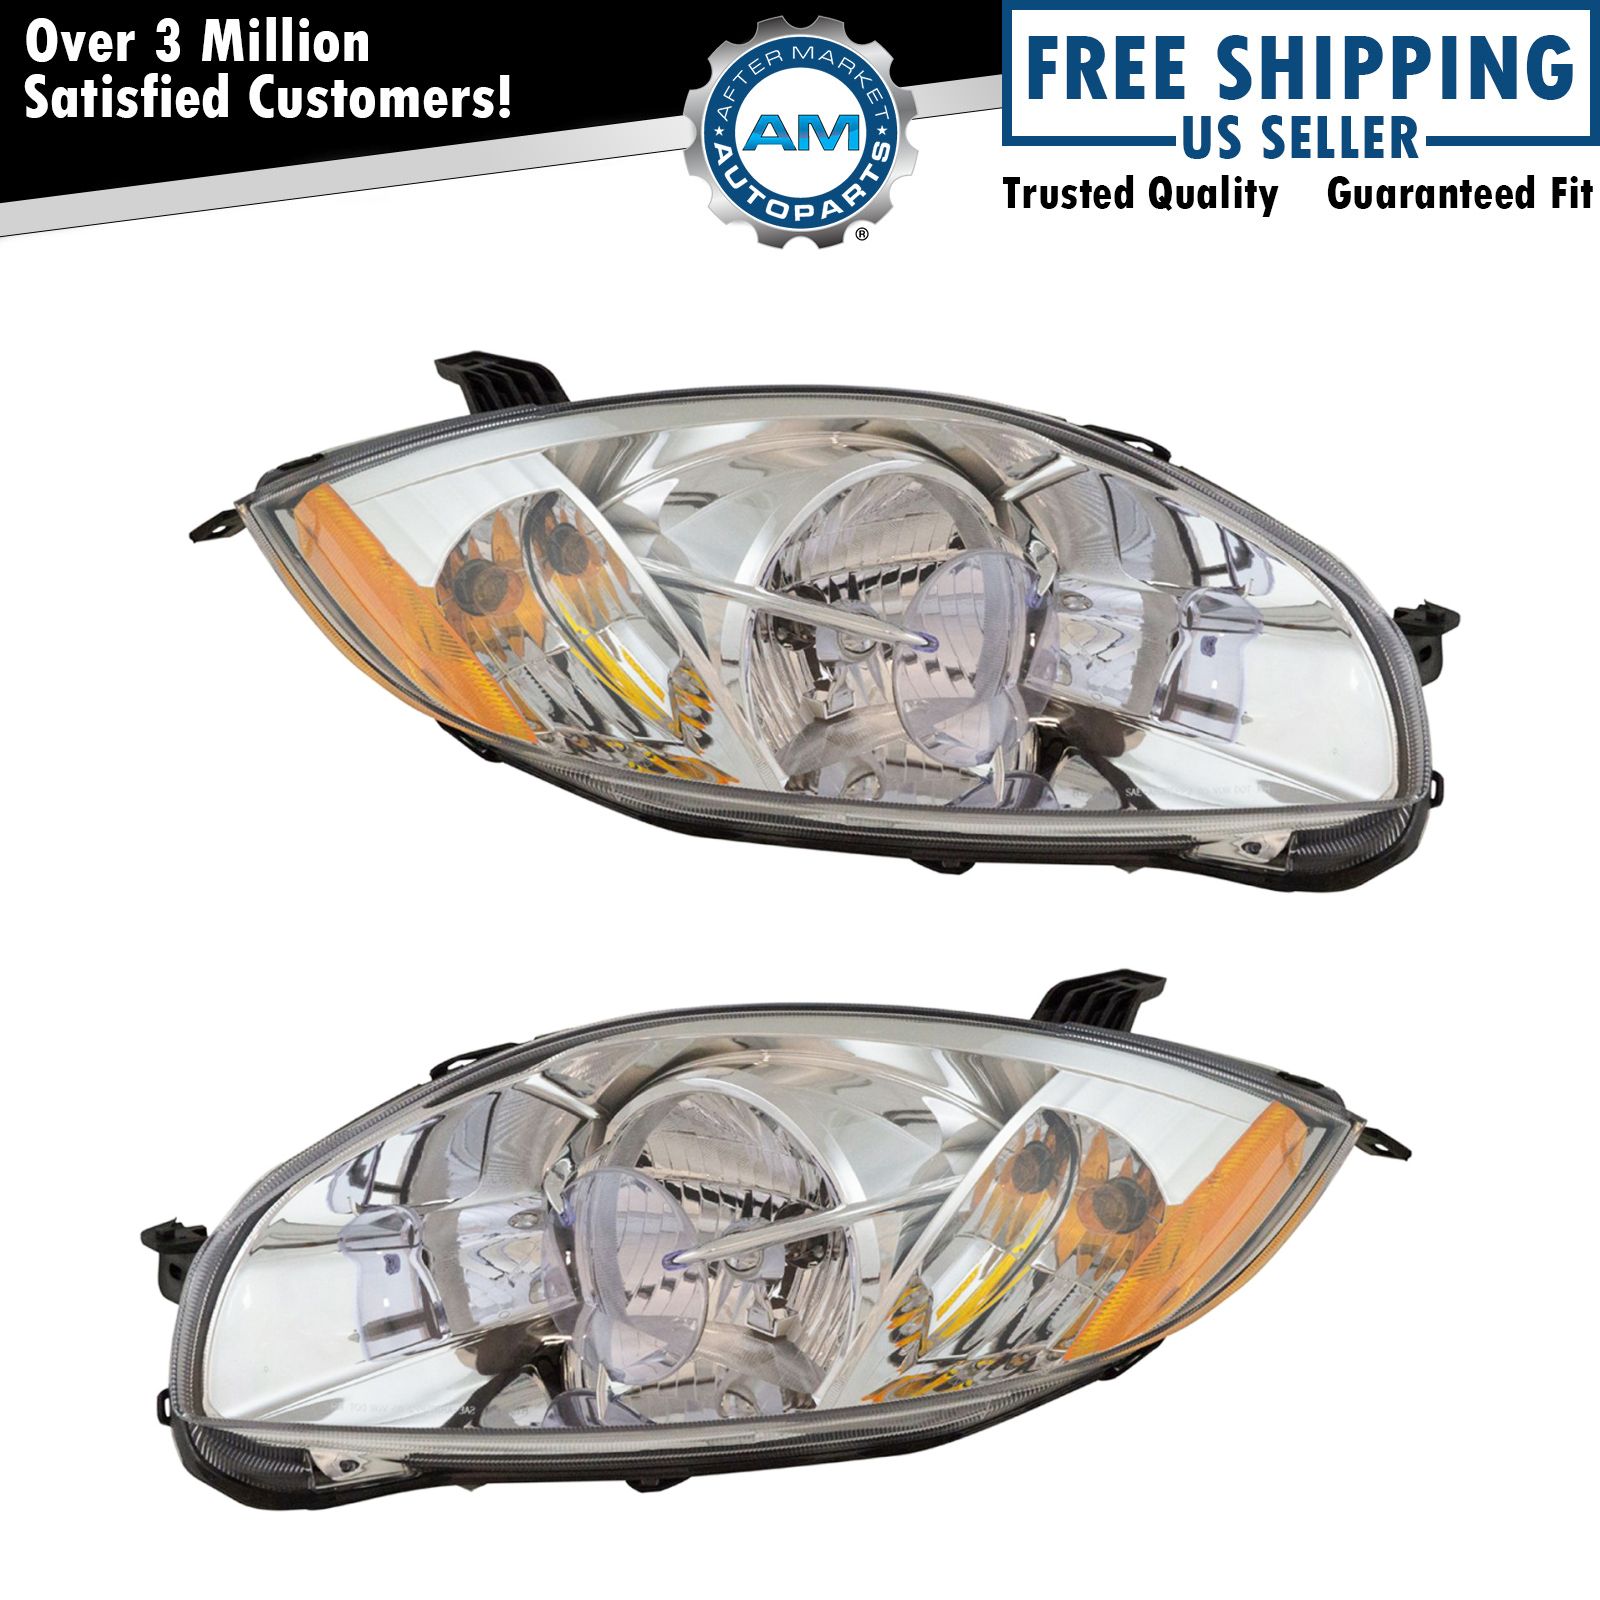 Halogen Headlight Lamp Assembly Pair LH & RH Sides for Mitsubishi Eclipse